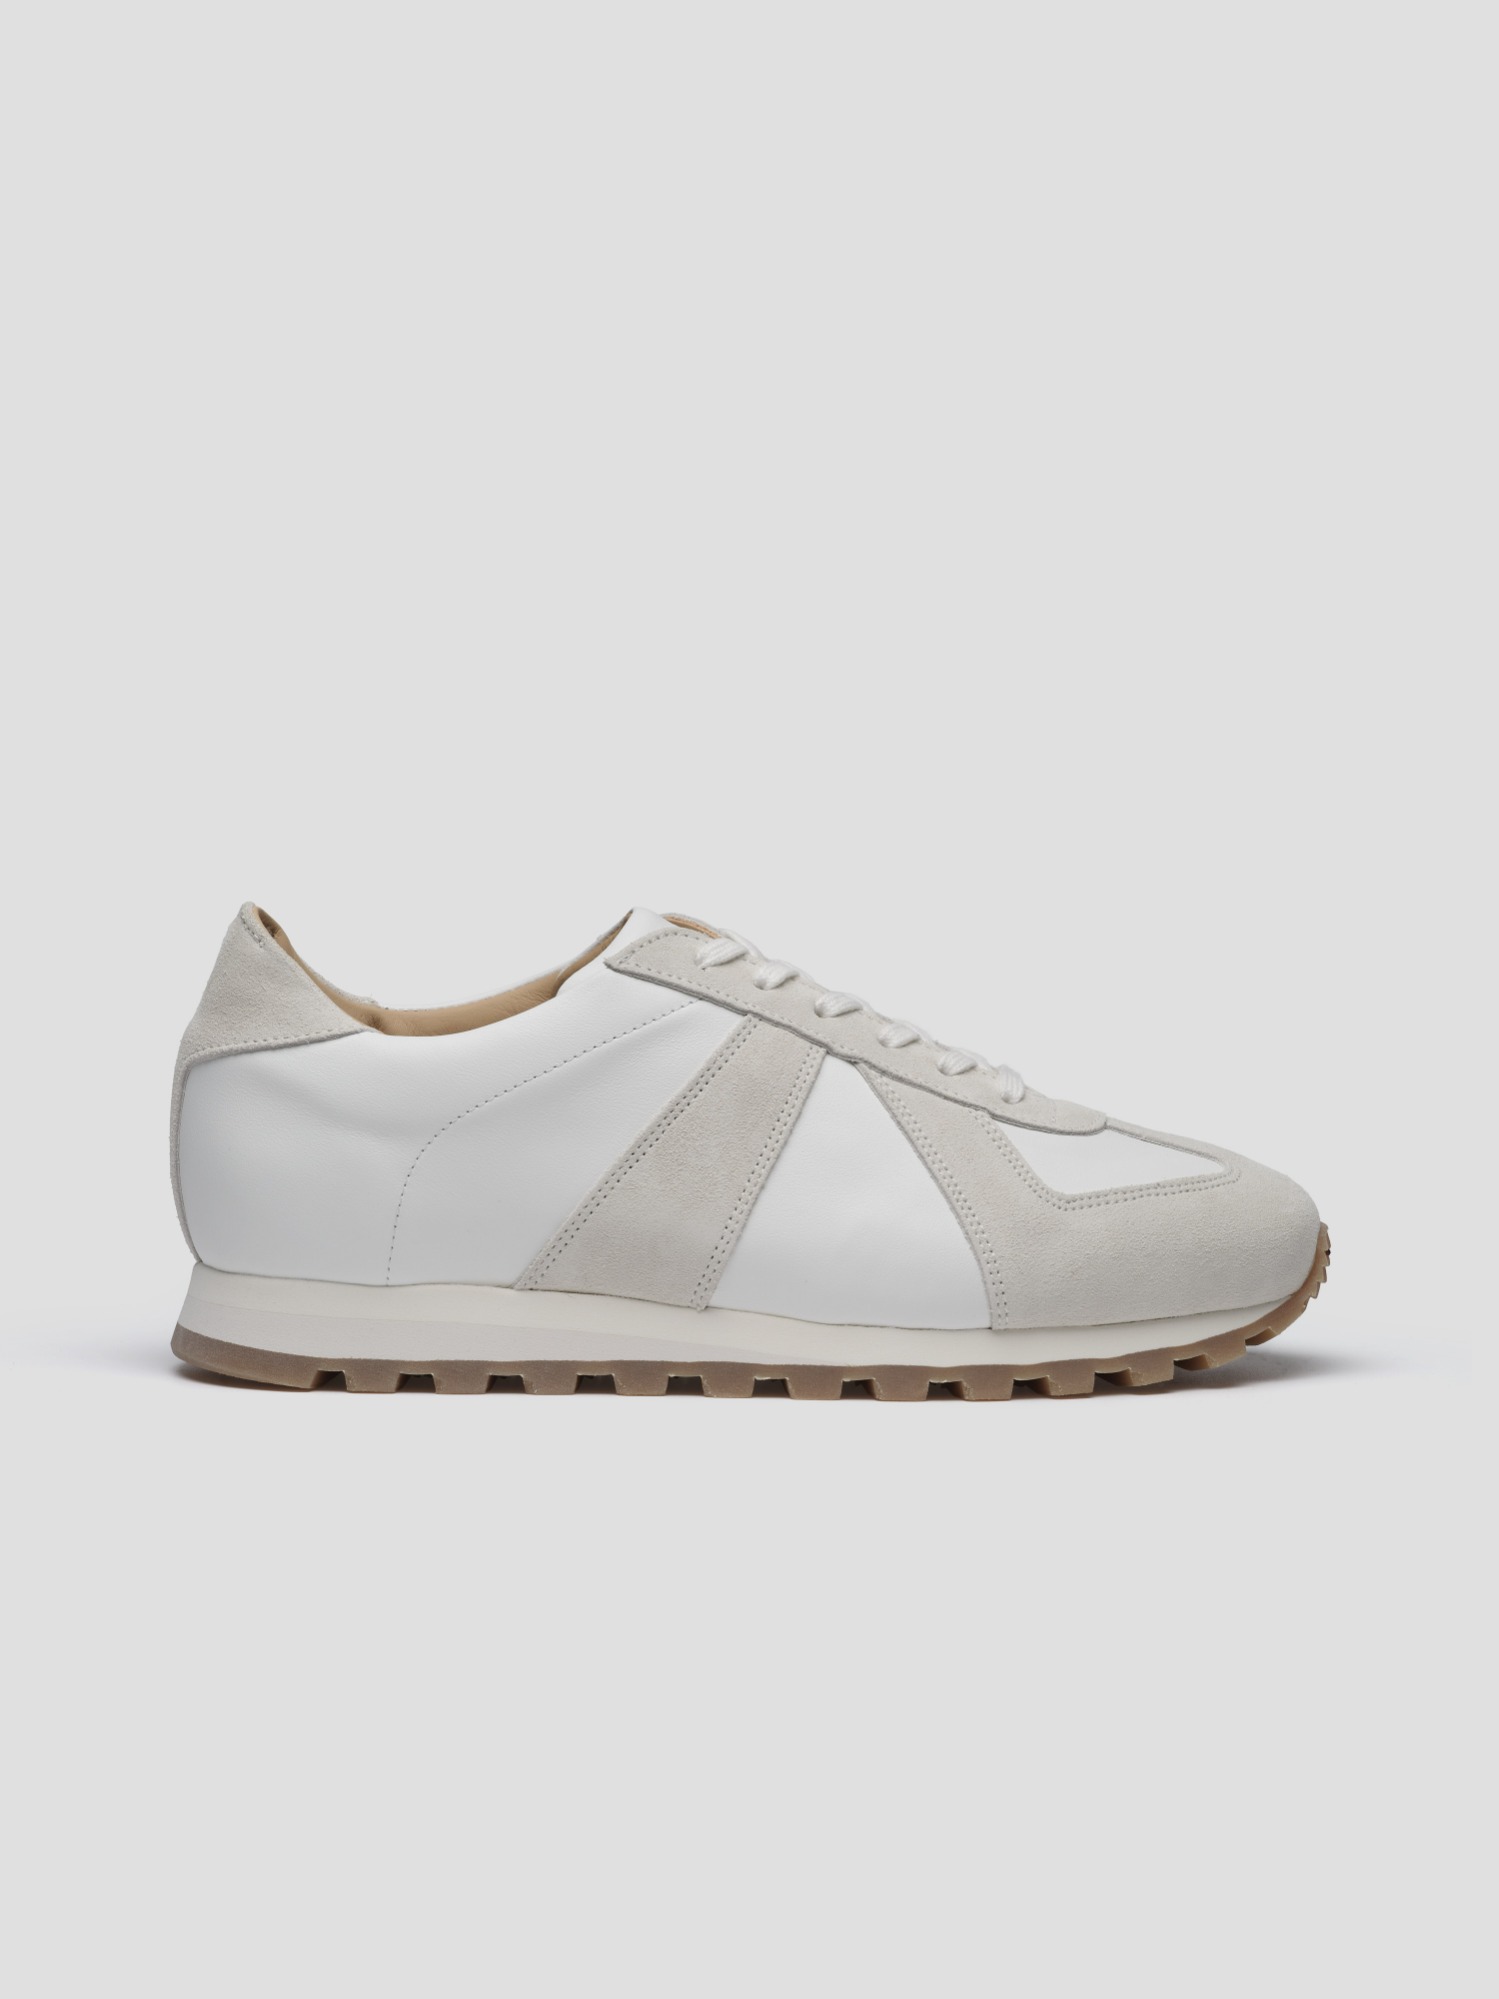 balmoral 07 suede leather bone white 스니커즈와 구두